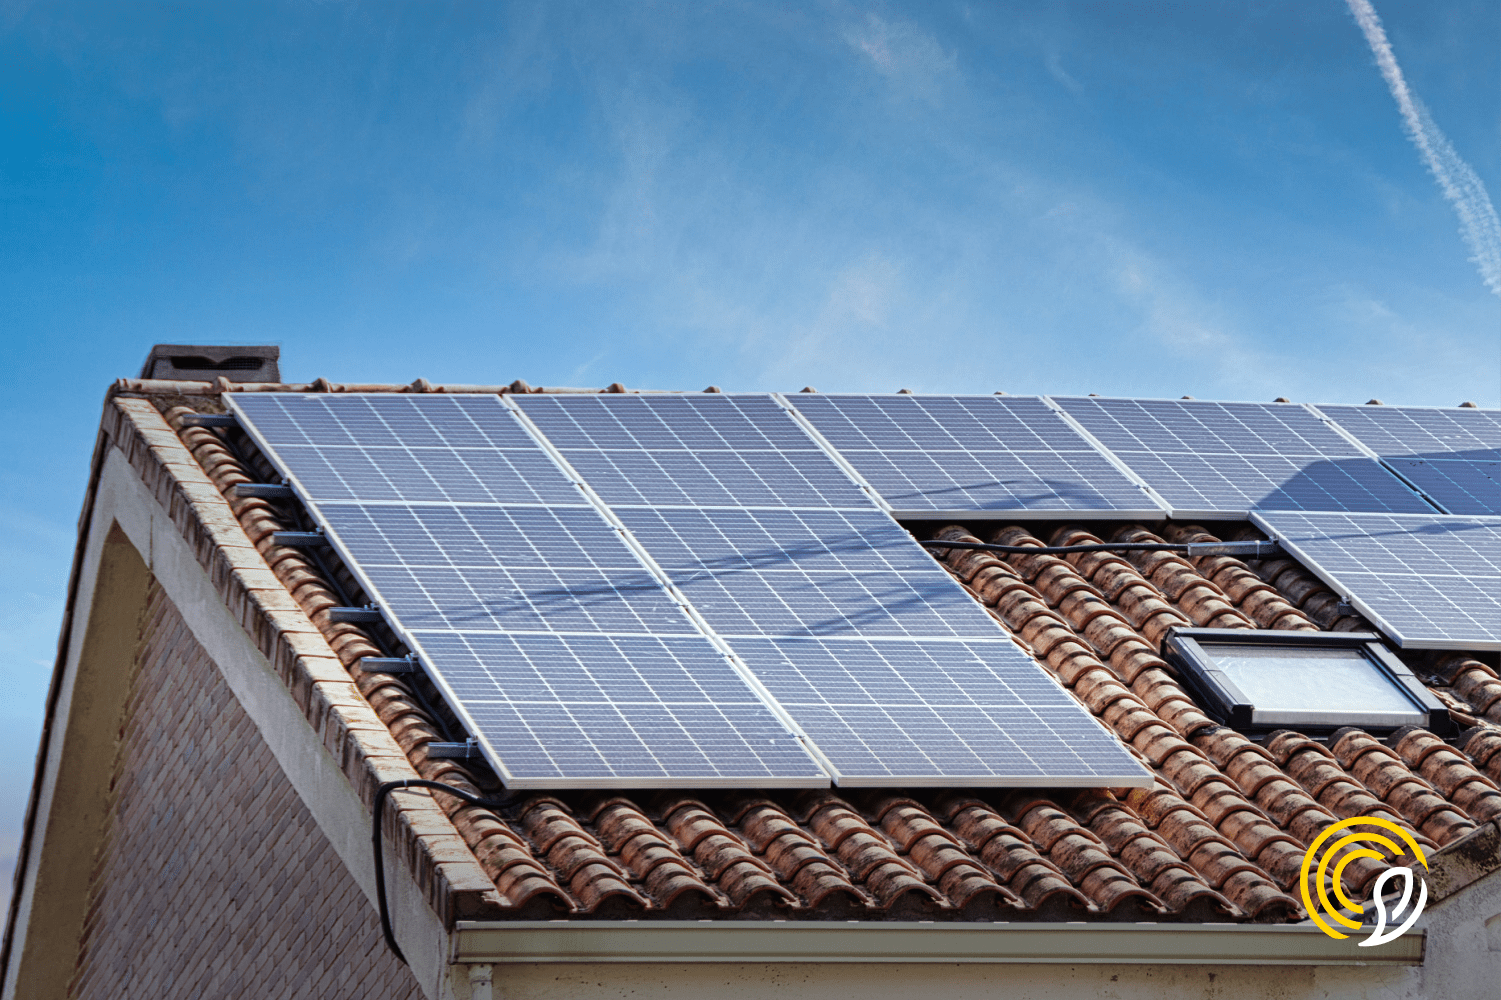 What is the lifetime of solar panels?